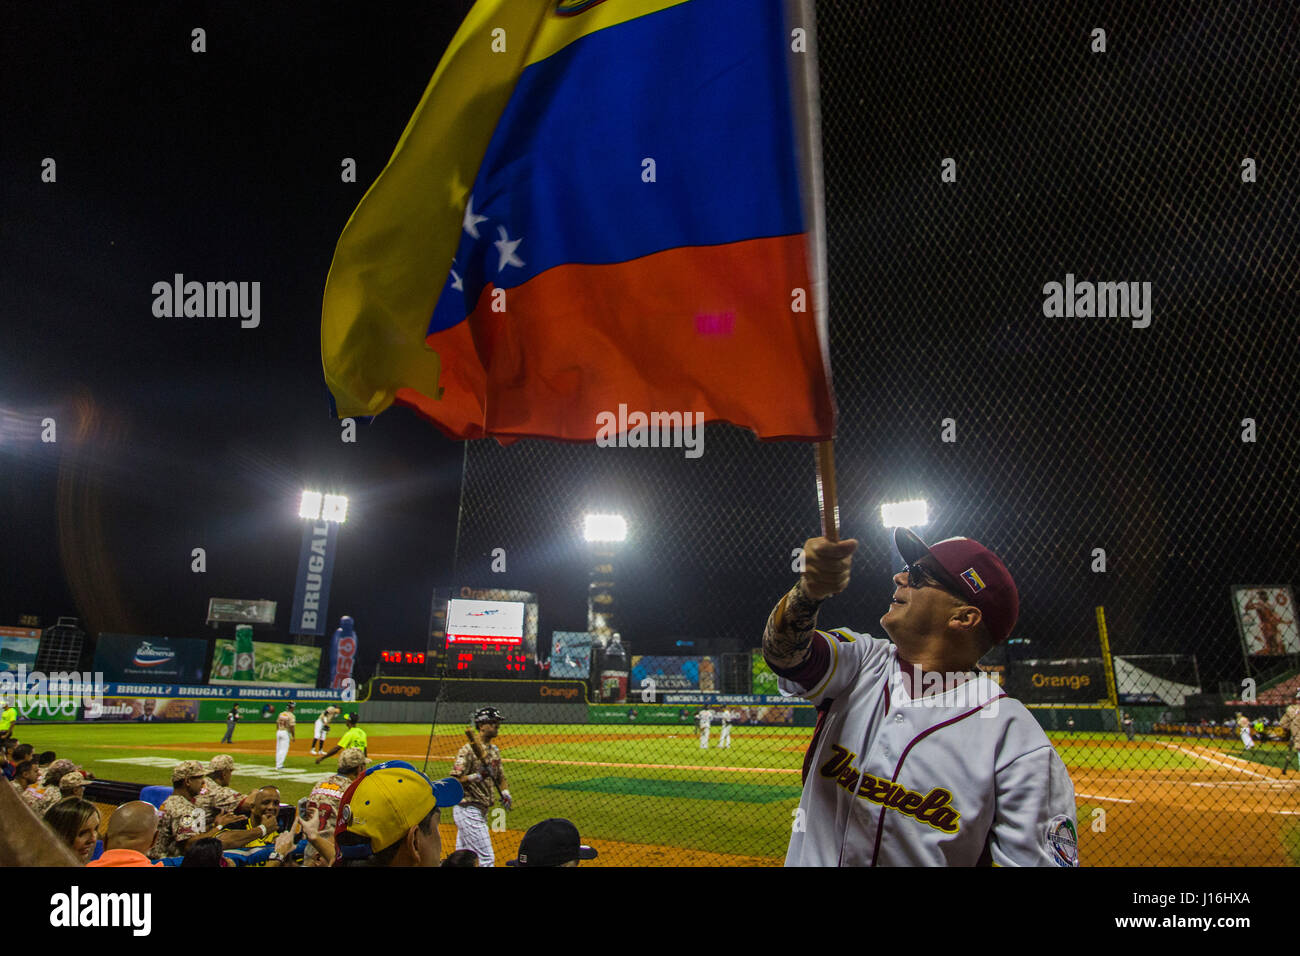 A Baseball Fan Waves A Large Venezuelan Flag In A Stadium Under A The Lights In The Dominican Republic Stock Photo